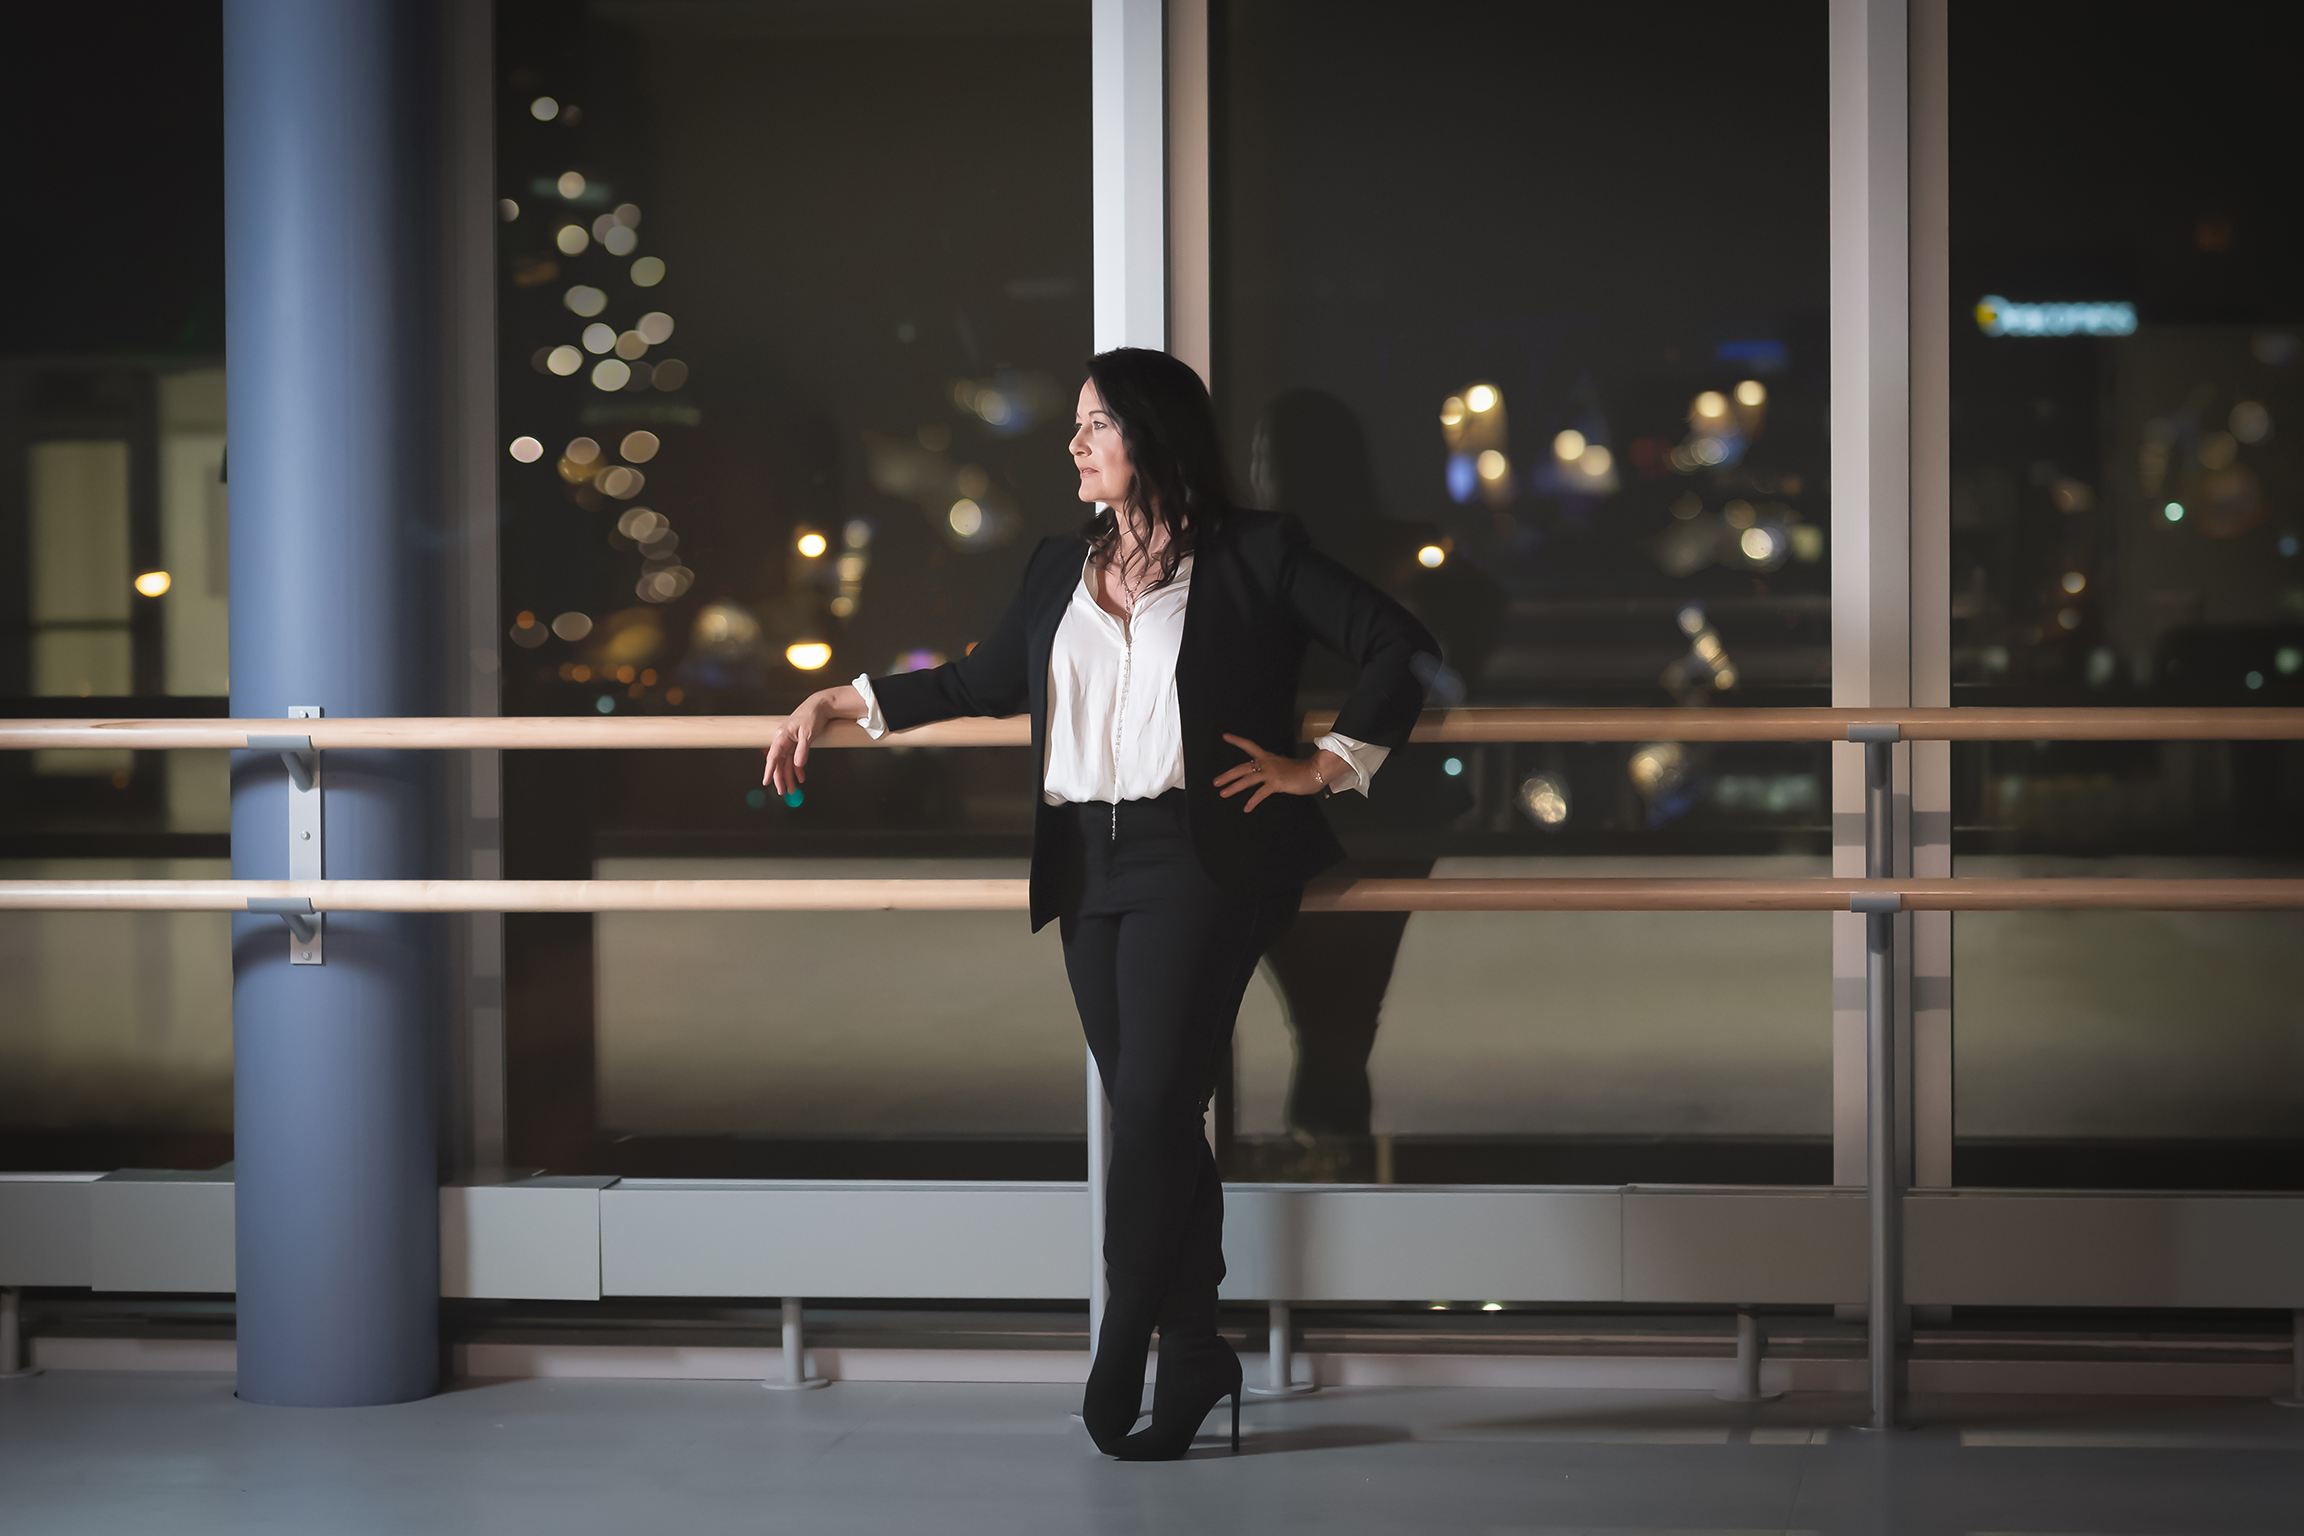 Jodie Gates, wearing a white blouse, dark blazer and pants and black heeled boots, stands against a ballet barre and looks off to her right. Behind her are large, floor-to-ceiling windwos that look out on the city of Cincinnati, where it is nighttime.